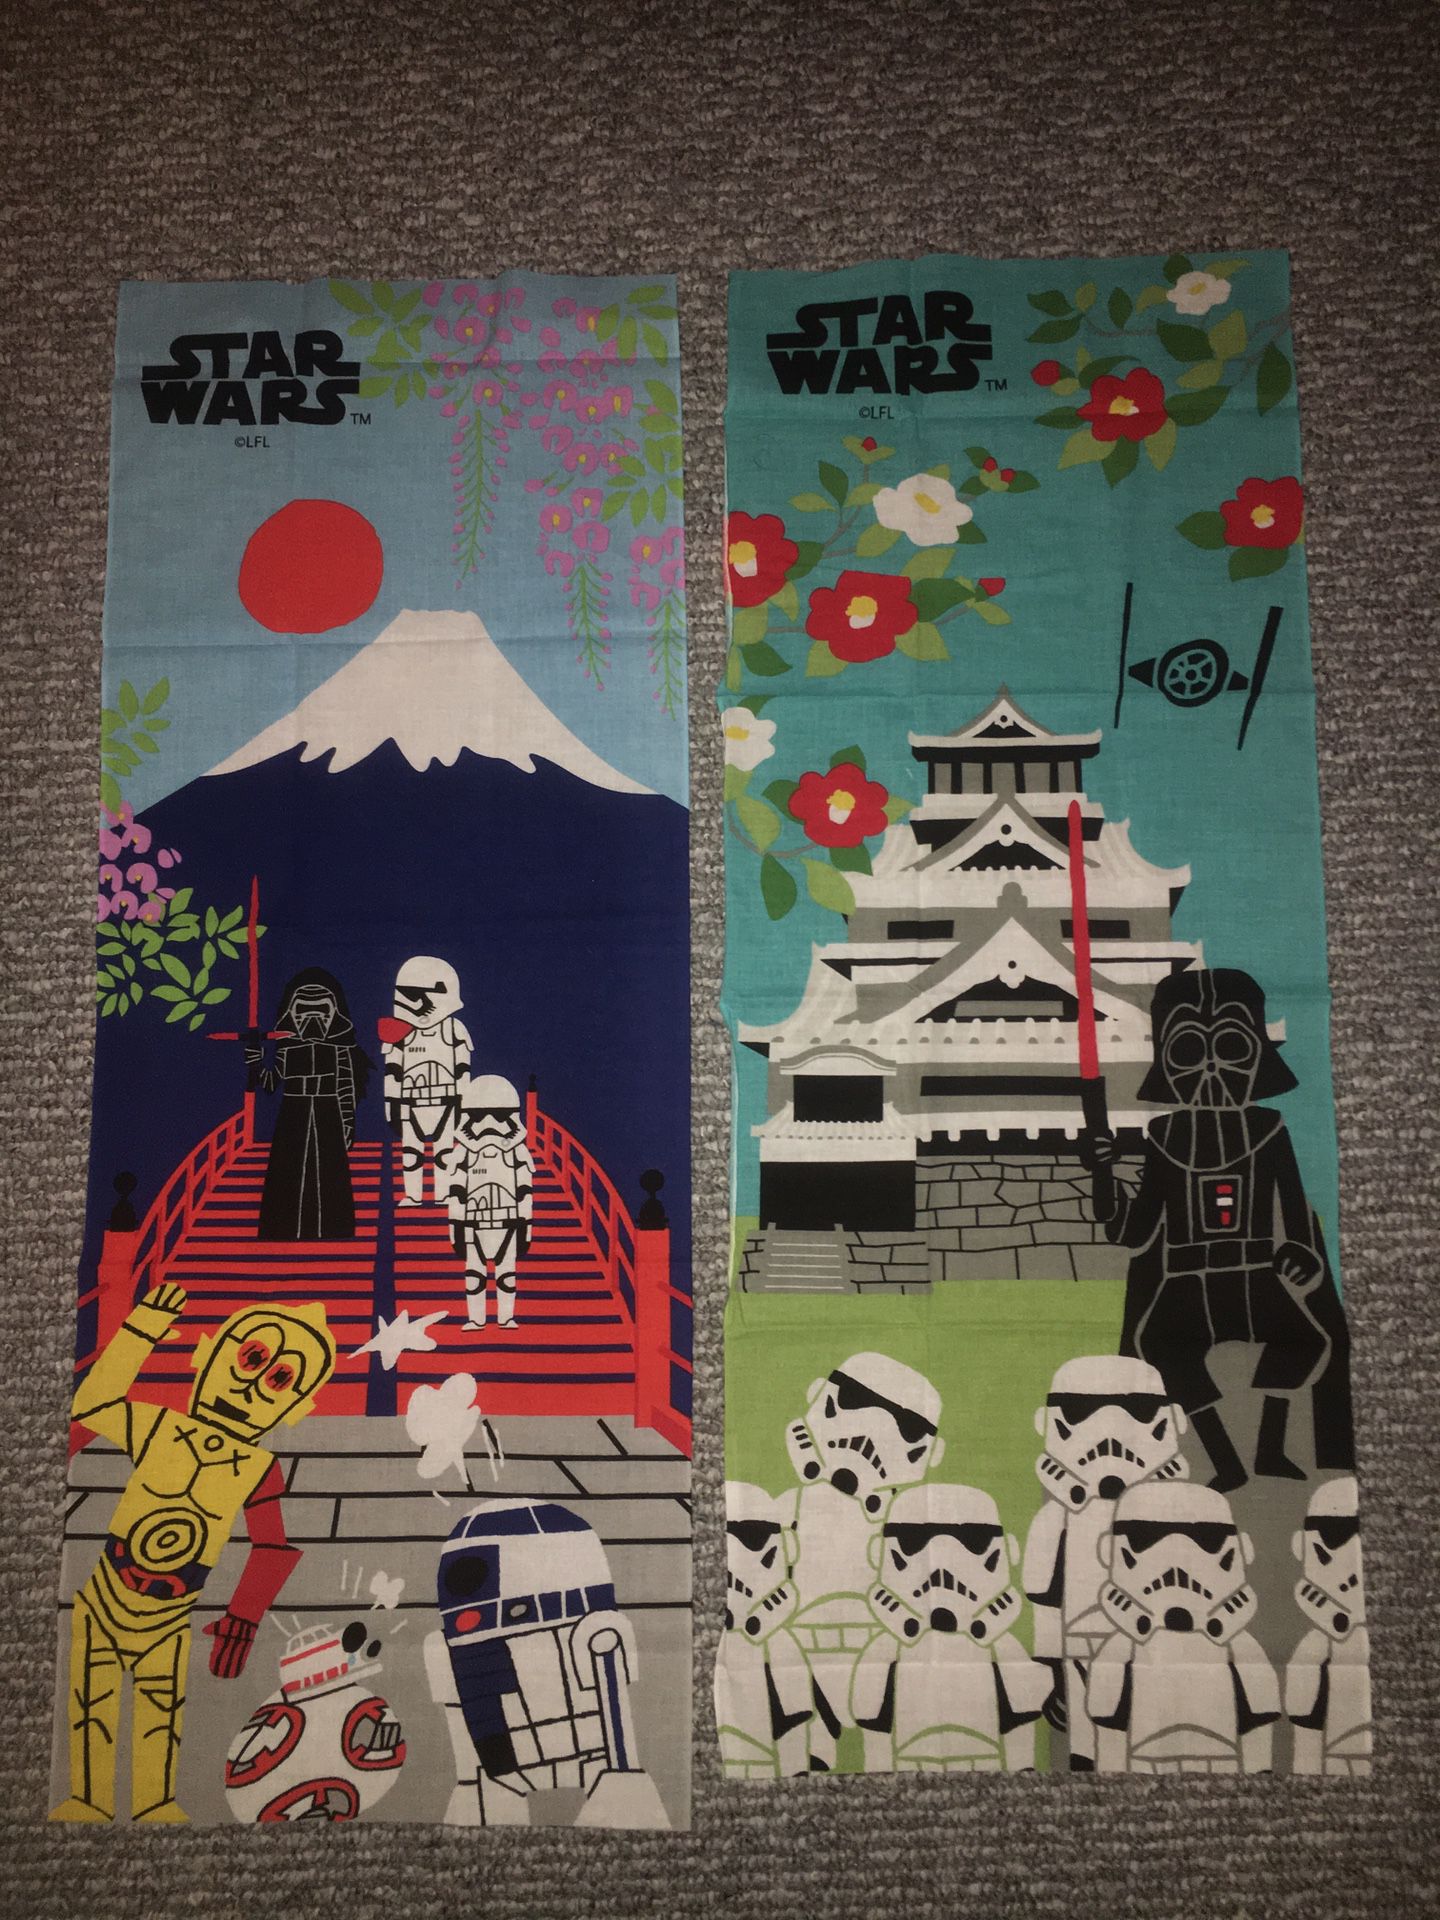 Star Wars Fabric Banners/Poster